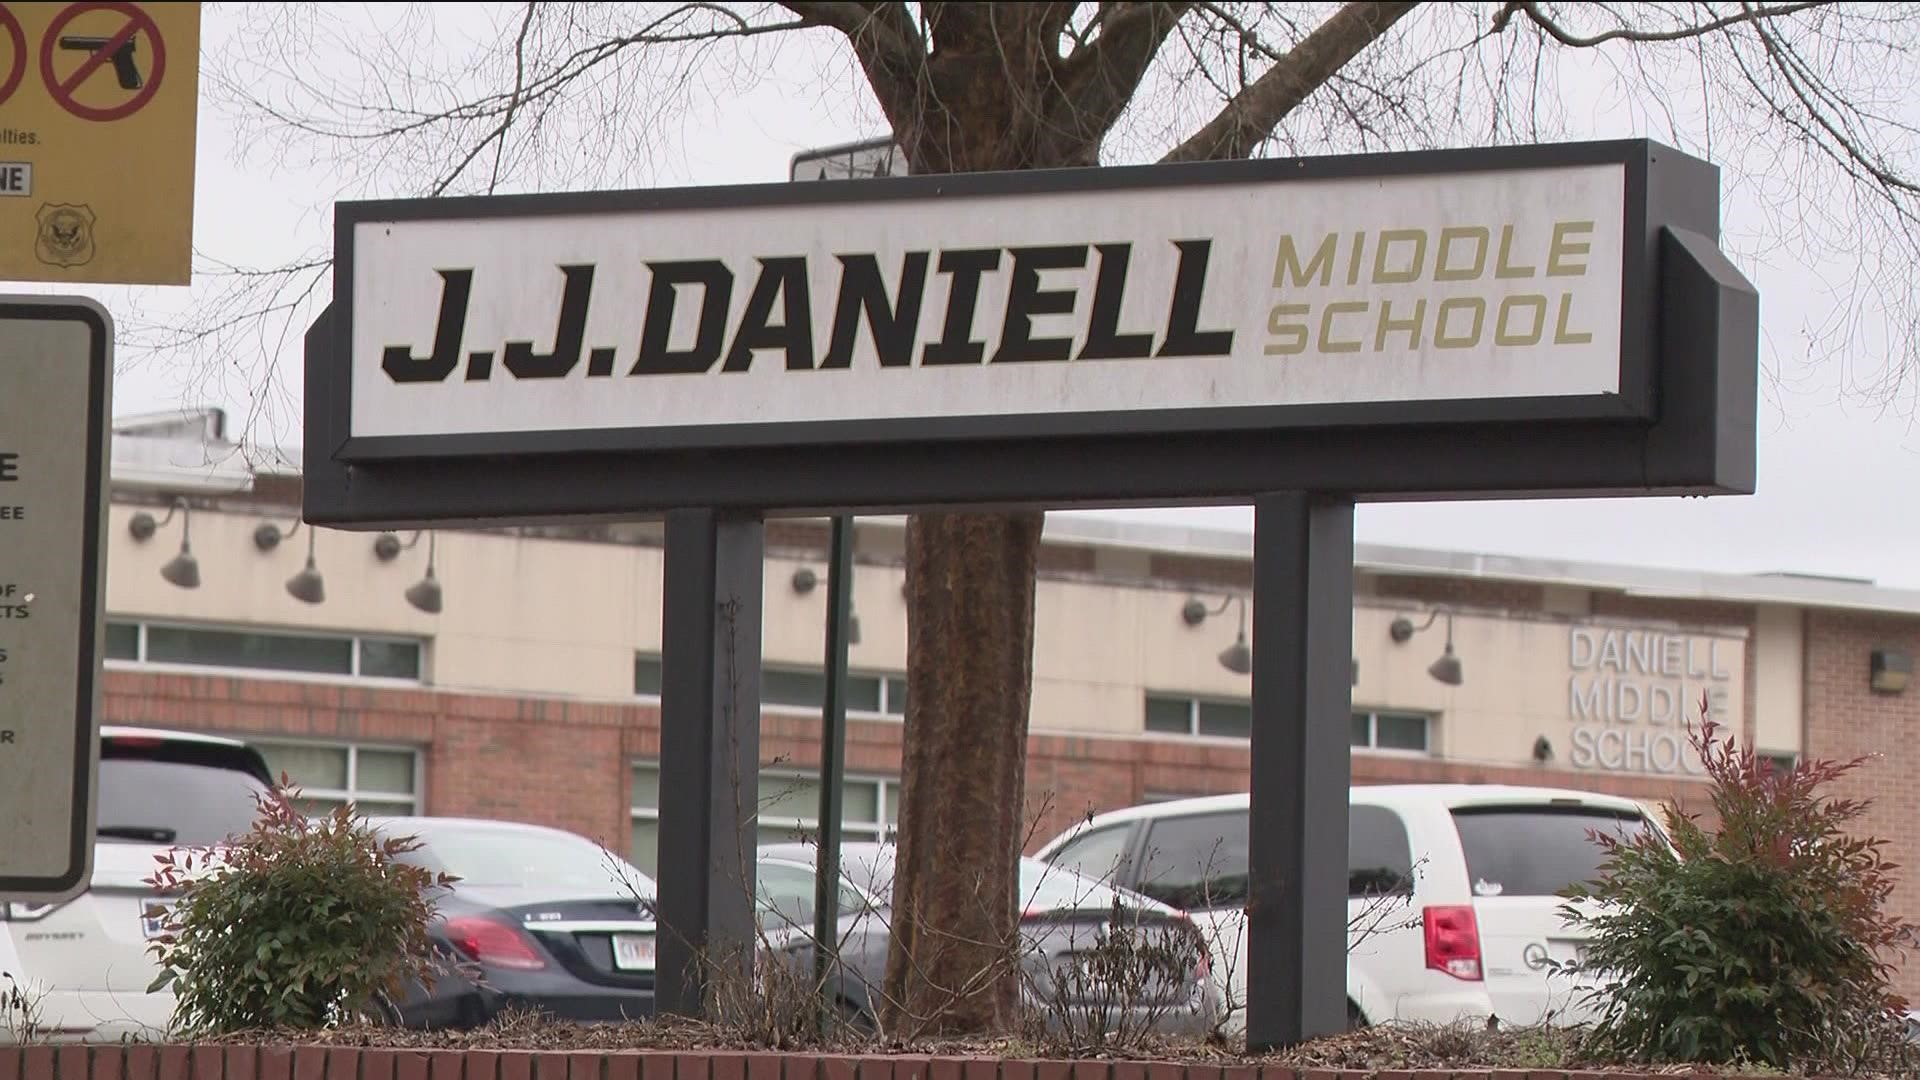 Authorities responded to a Marietta middle school Tuesday afternoon for what officials said was an altercation between two students, according to a spokesperson.